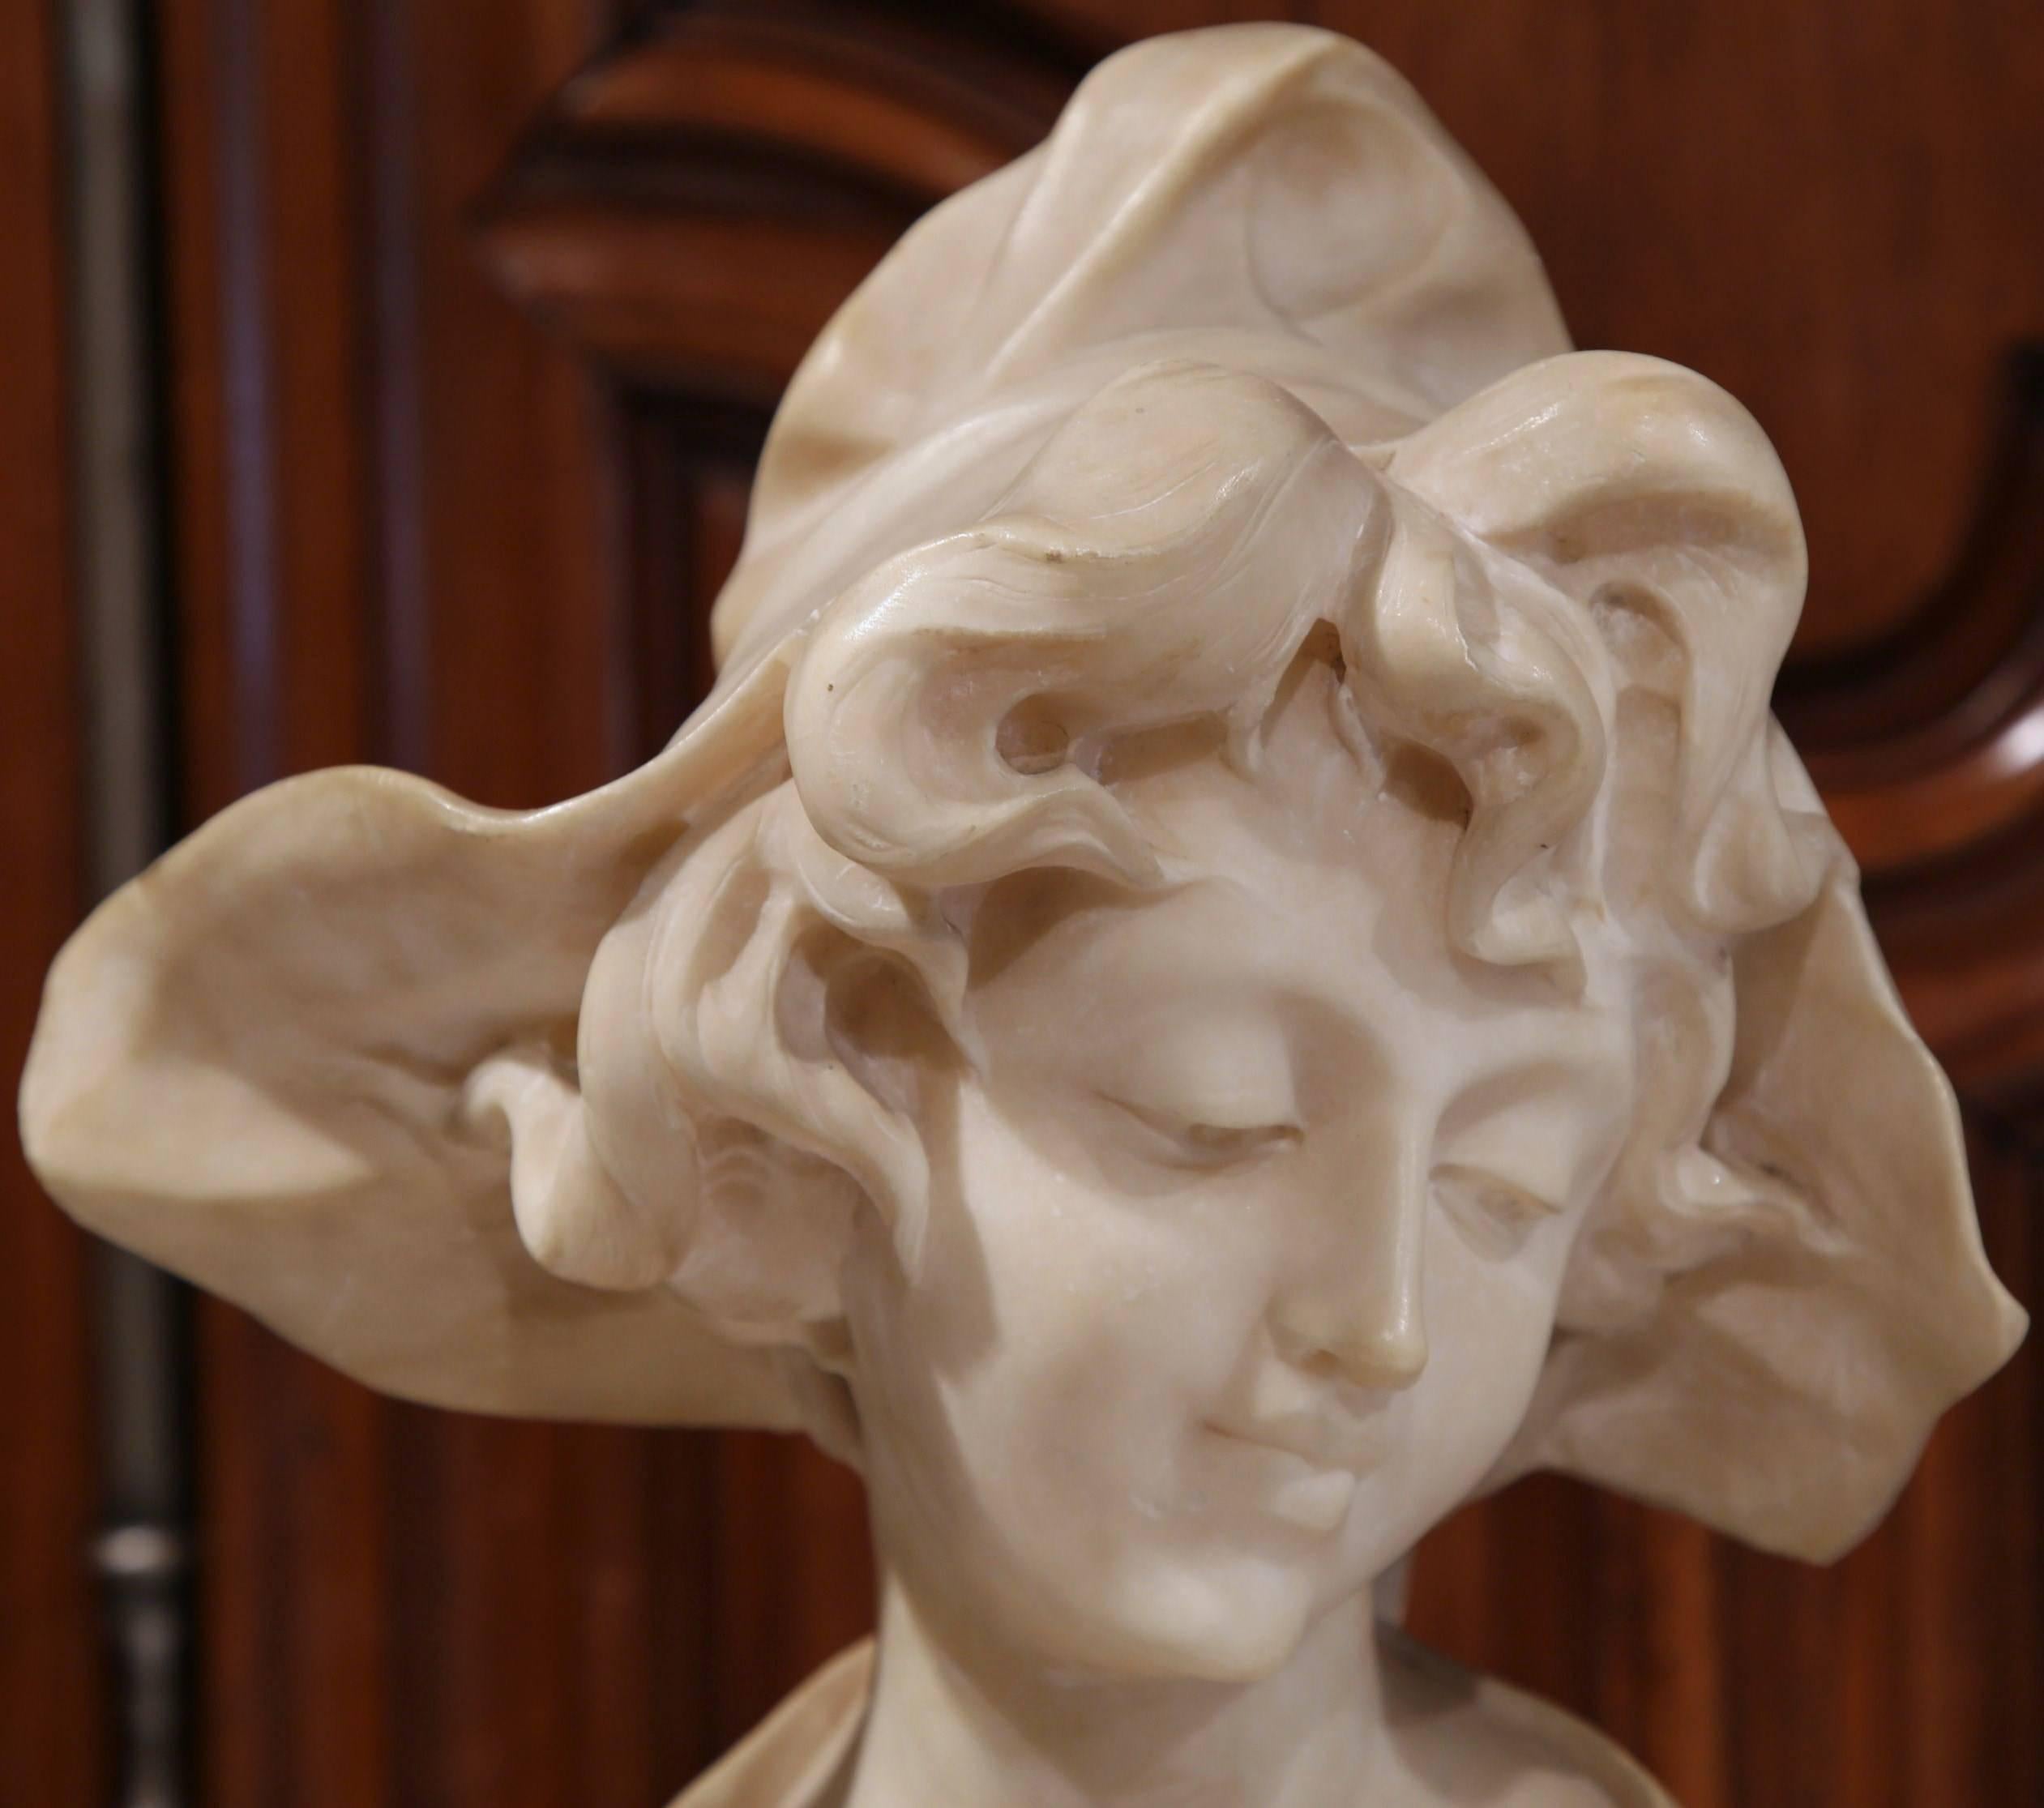 This antique bust is a classically French sculpture for a home of any style. The bust, sculpted circa 1860, features the serene face of a young woman wearing a bonnet and dressed in traditional clothing. The piece is white marble, has a beautiful